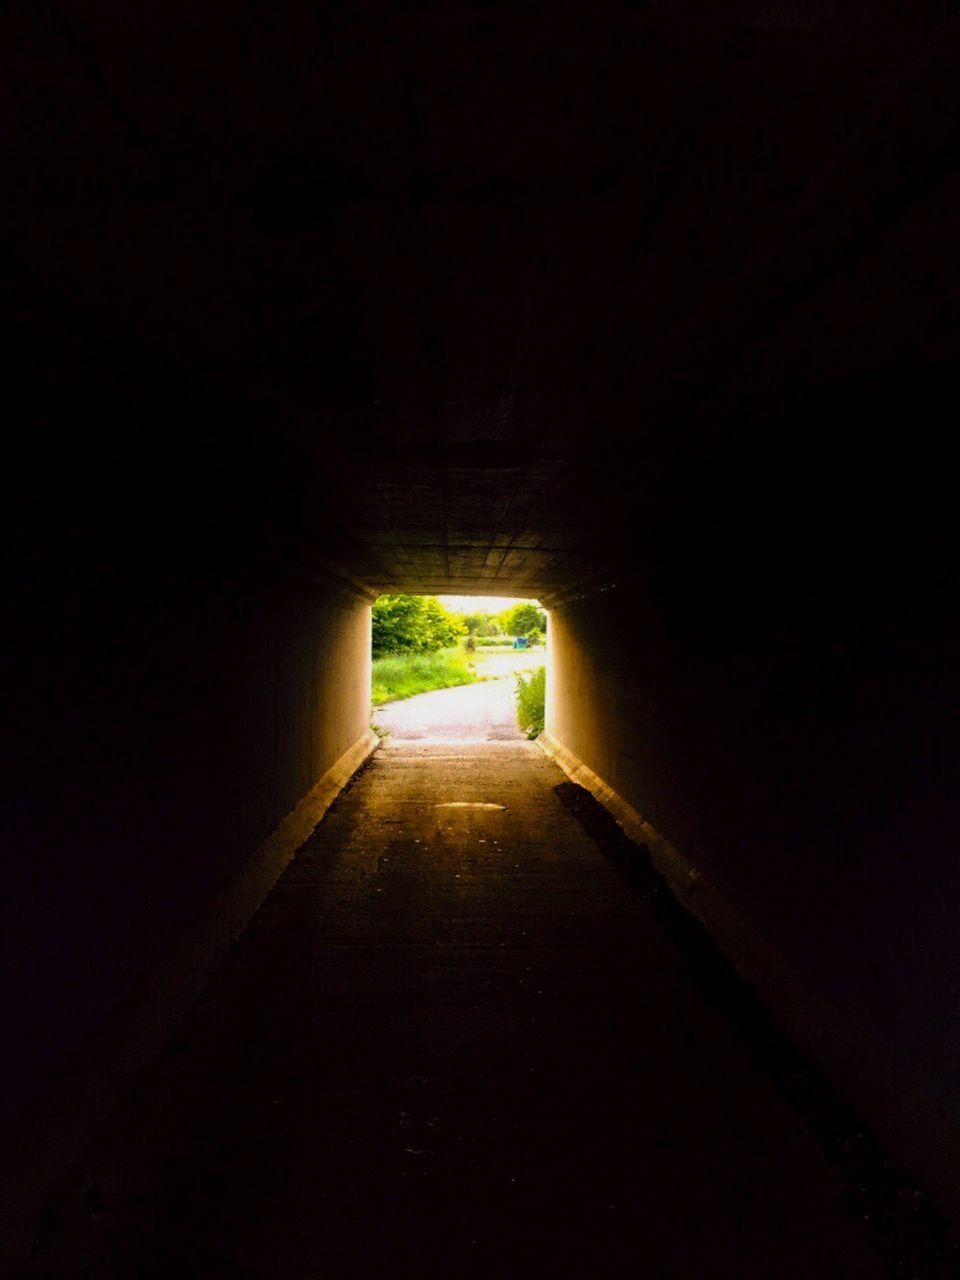 EMPTY TUNNEL WITH TUNNEL